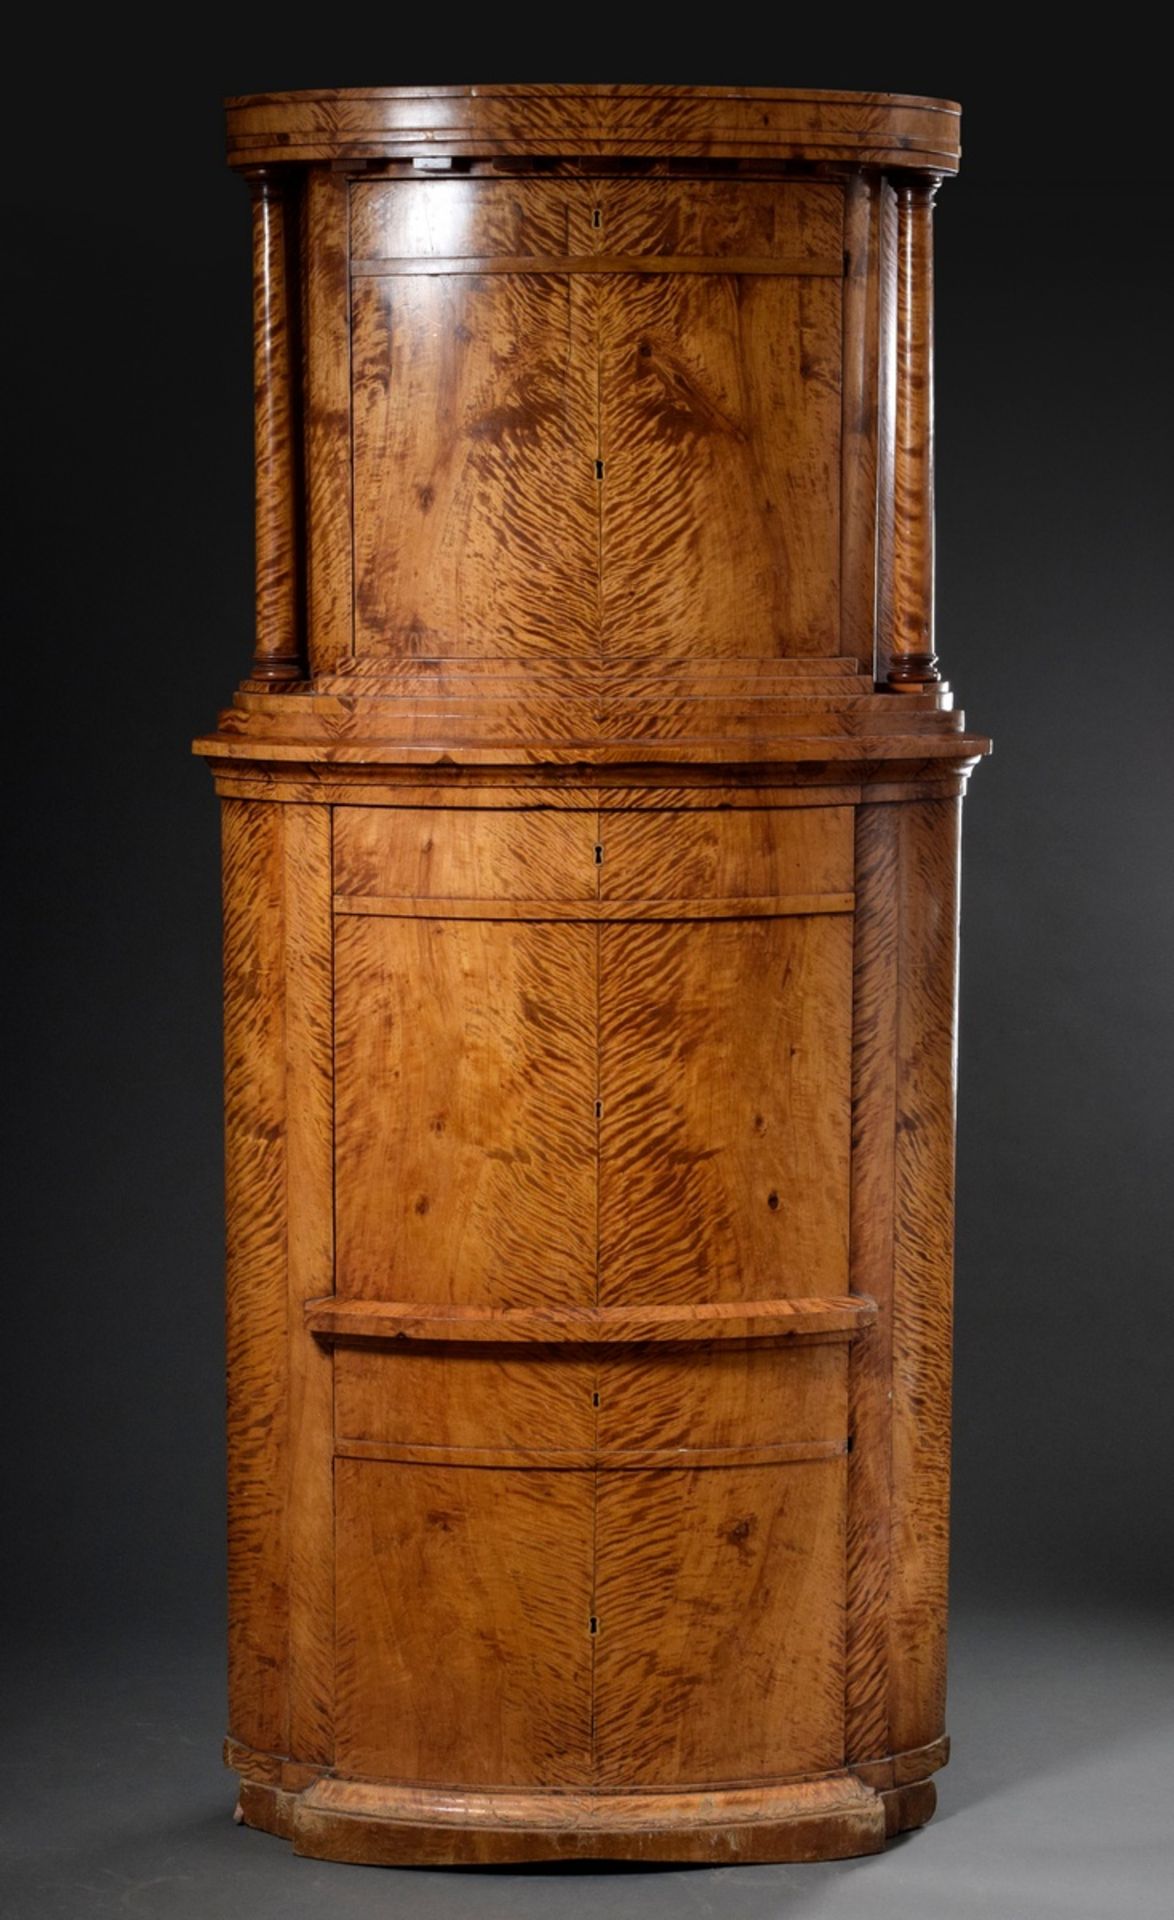 Imposing Empire corner writing cabinet with semi-circular front and lateral full columns in the top